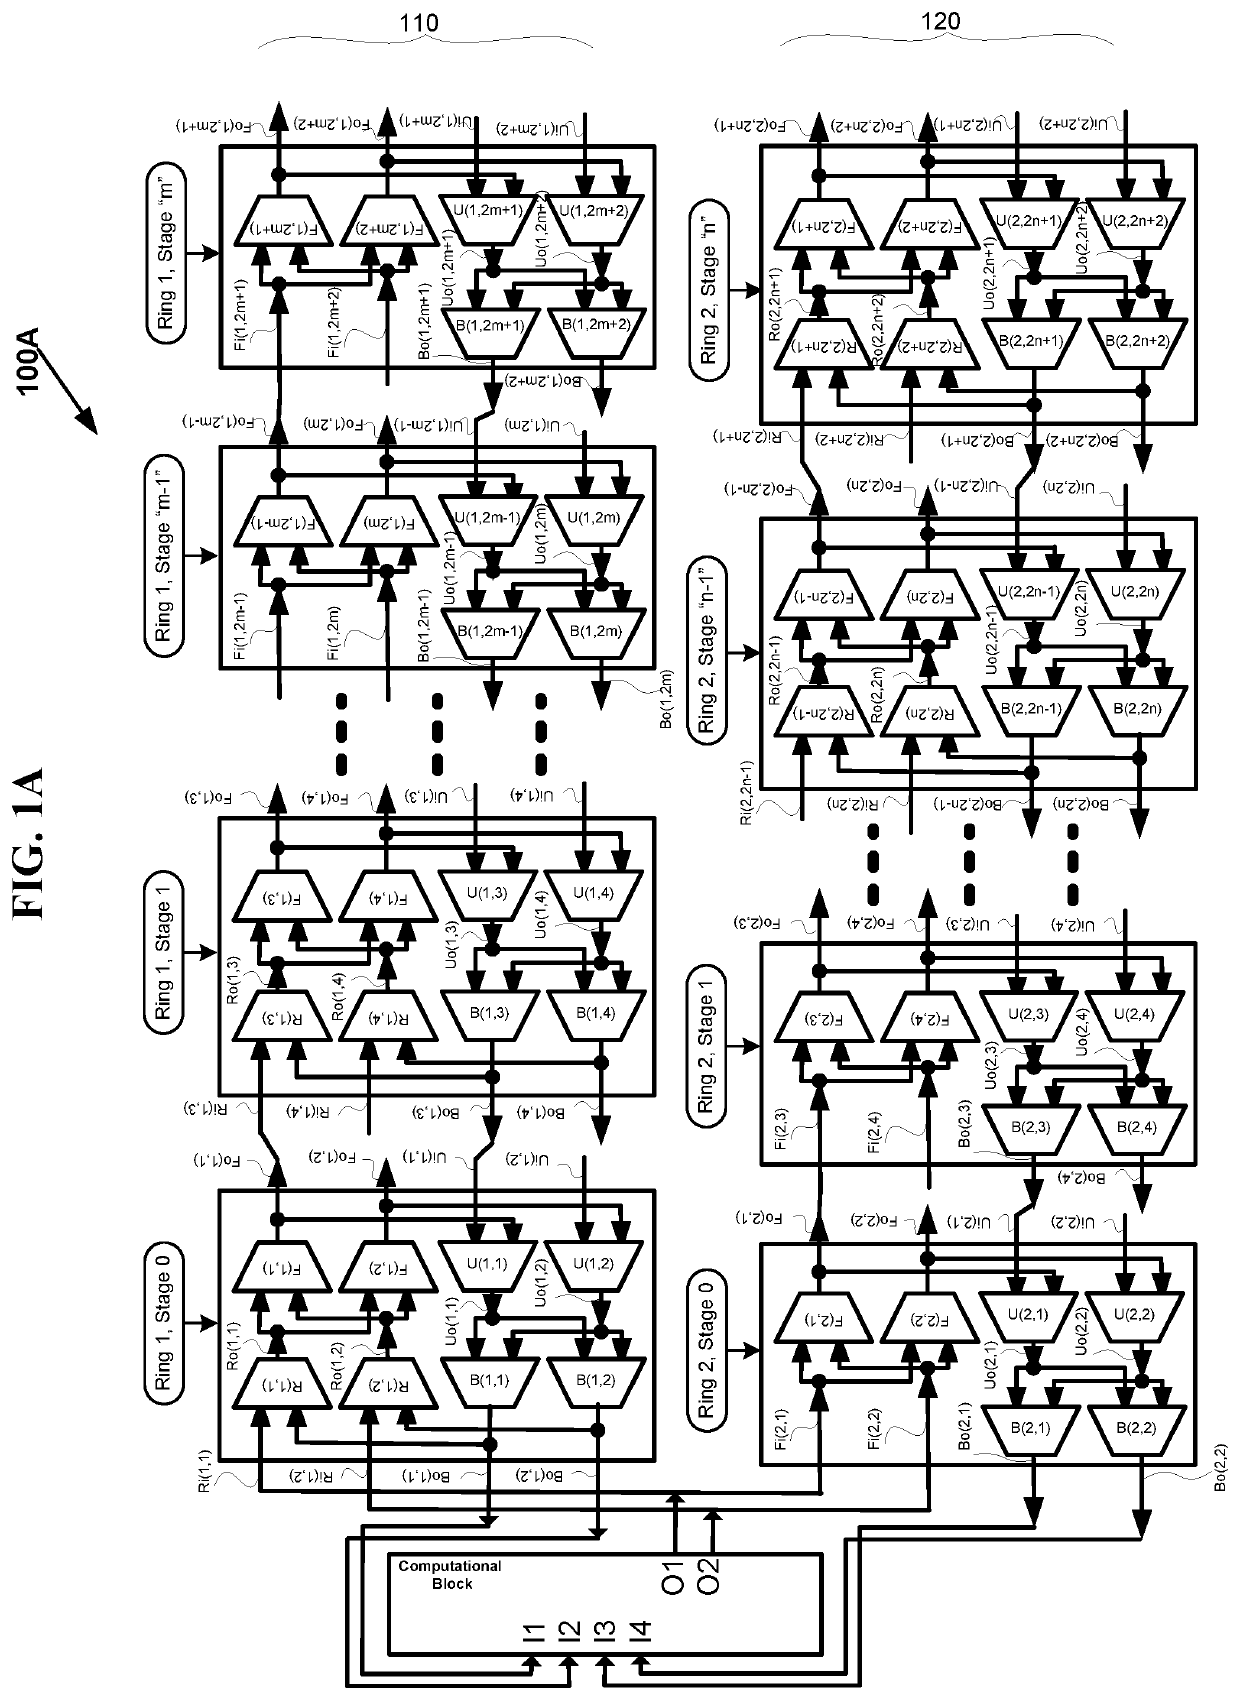 Optimization of multi-stage hierarchical networks for practical routing applications